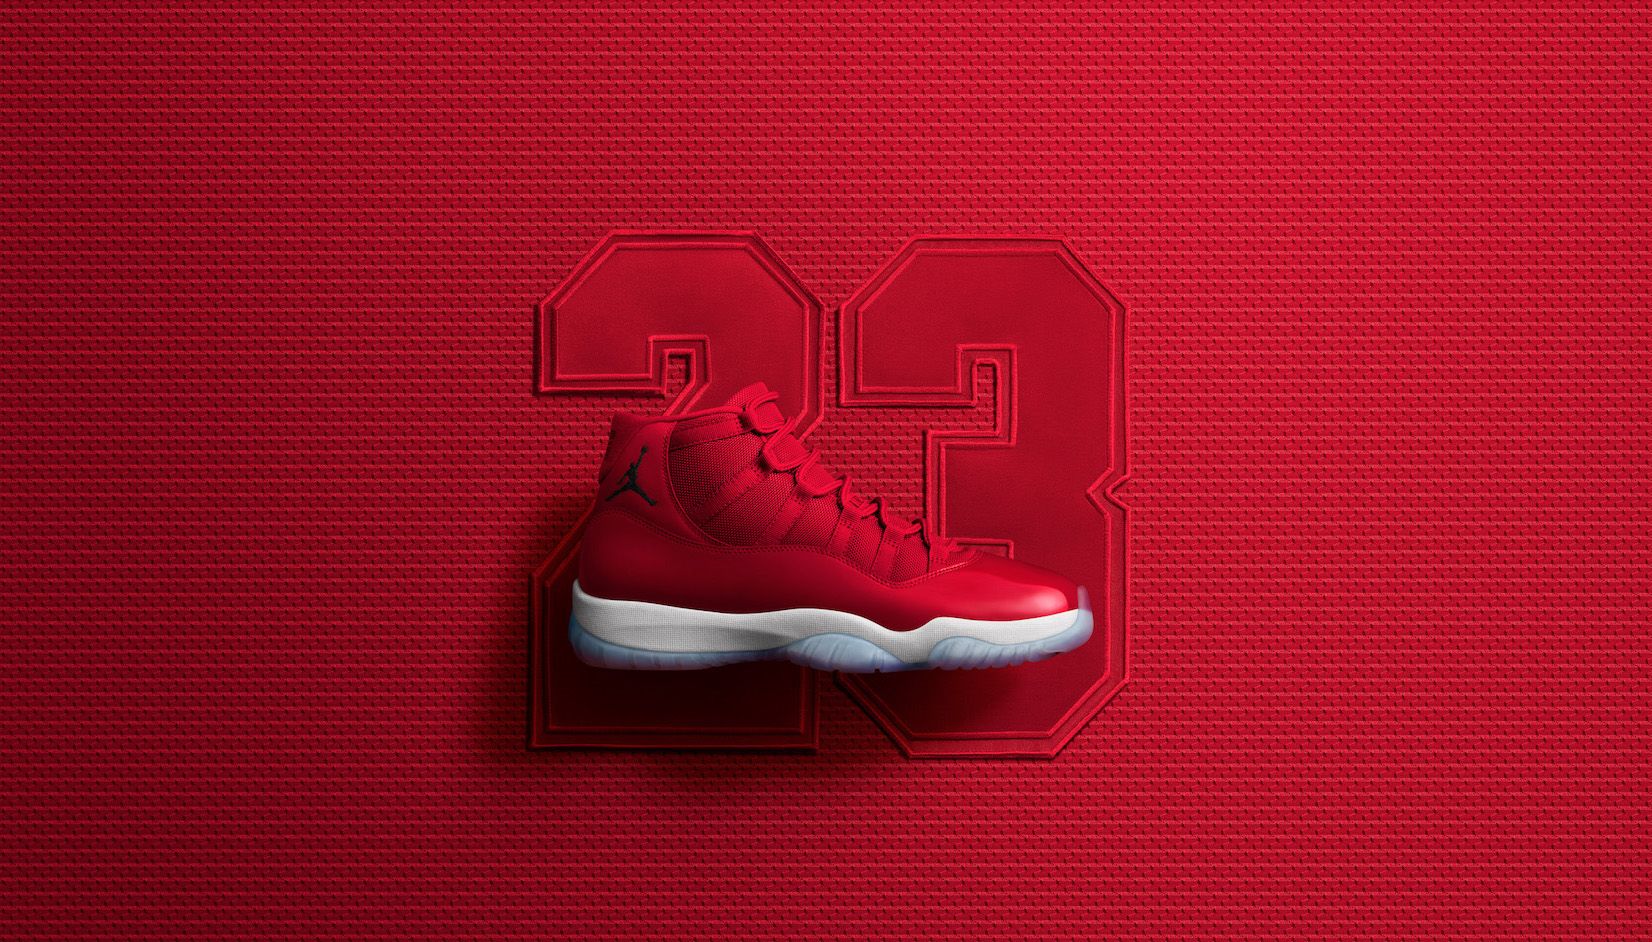 The Air Jordan 11 'Win Like '96' is a Tribute to Chicago